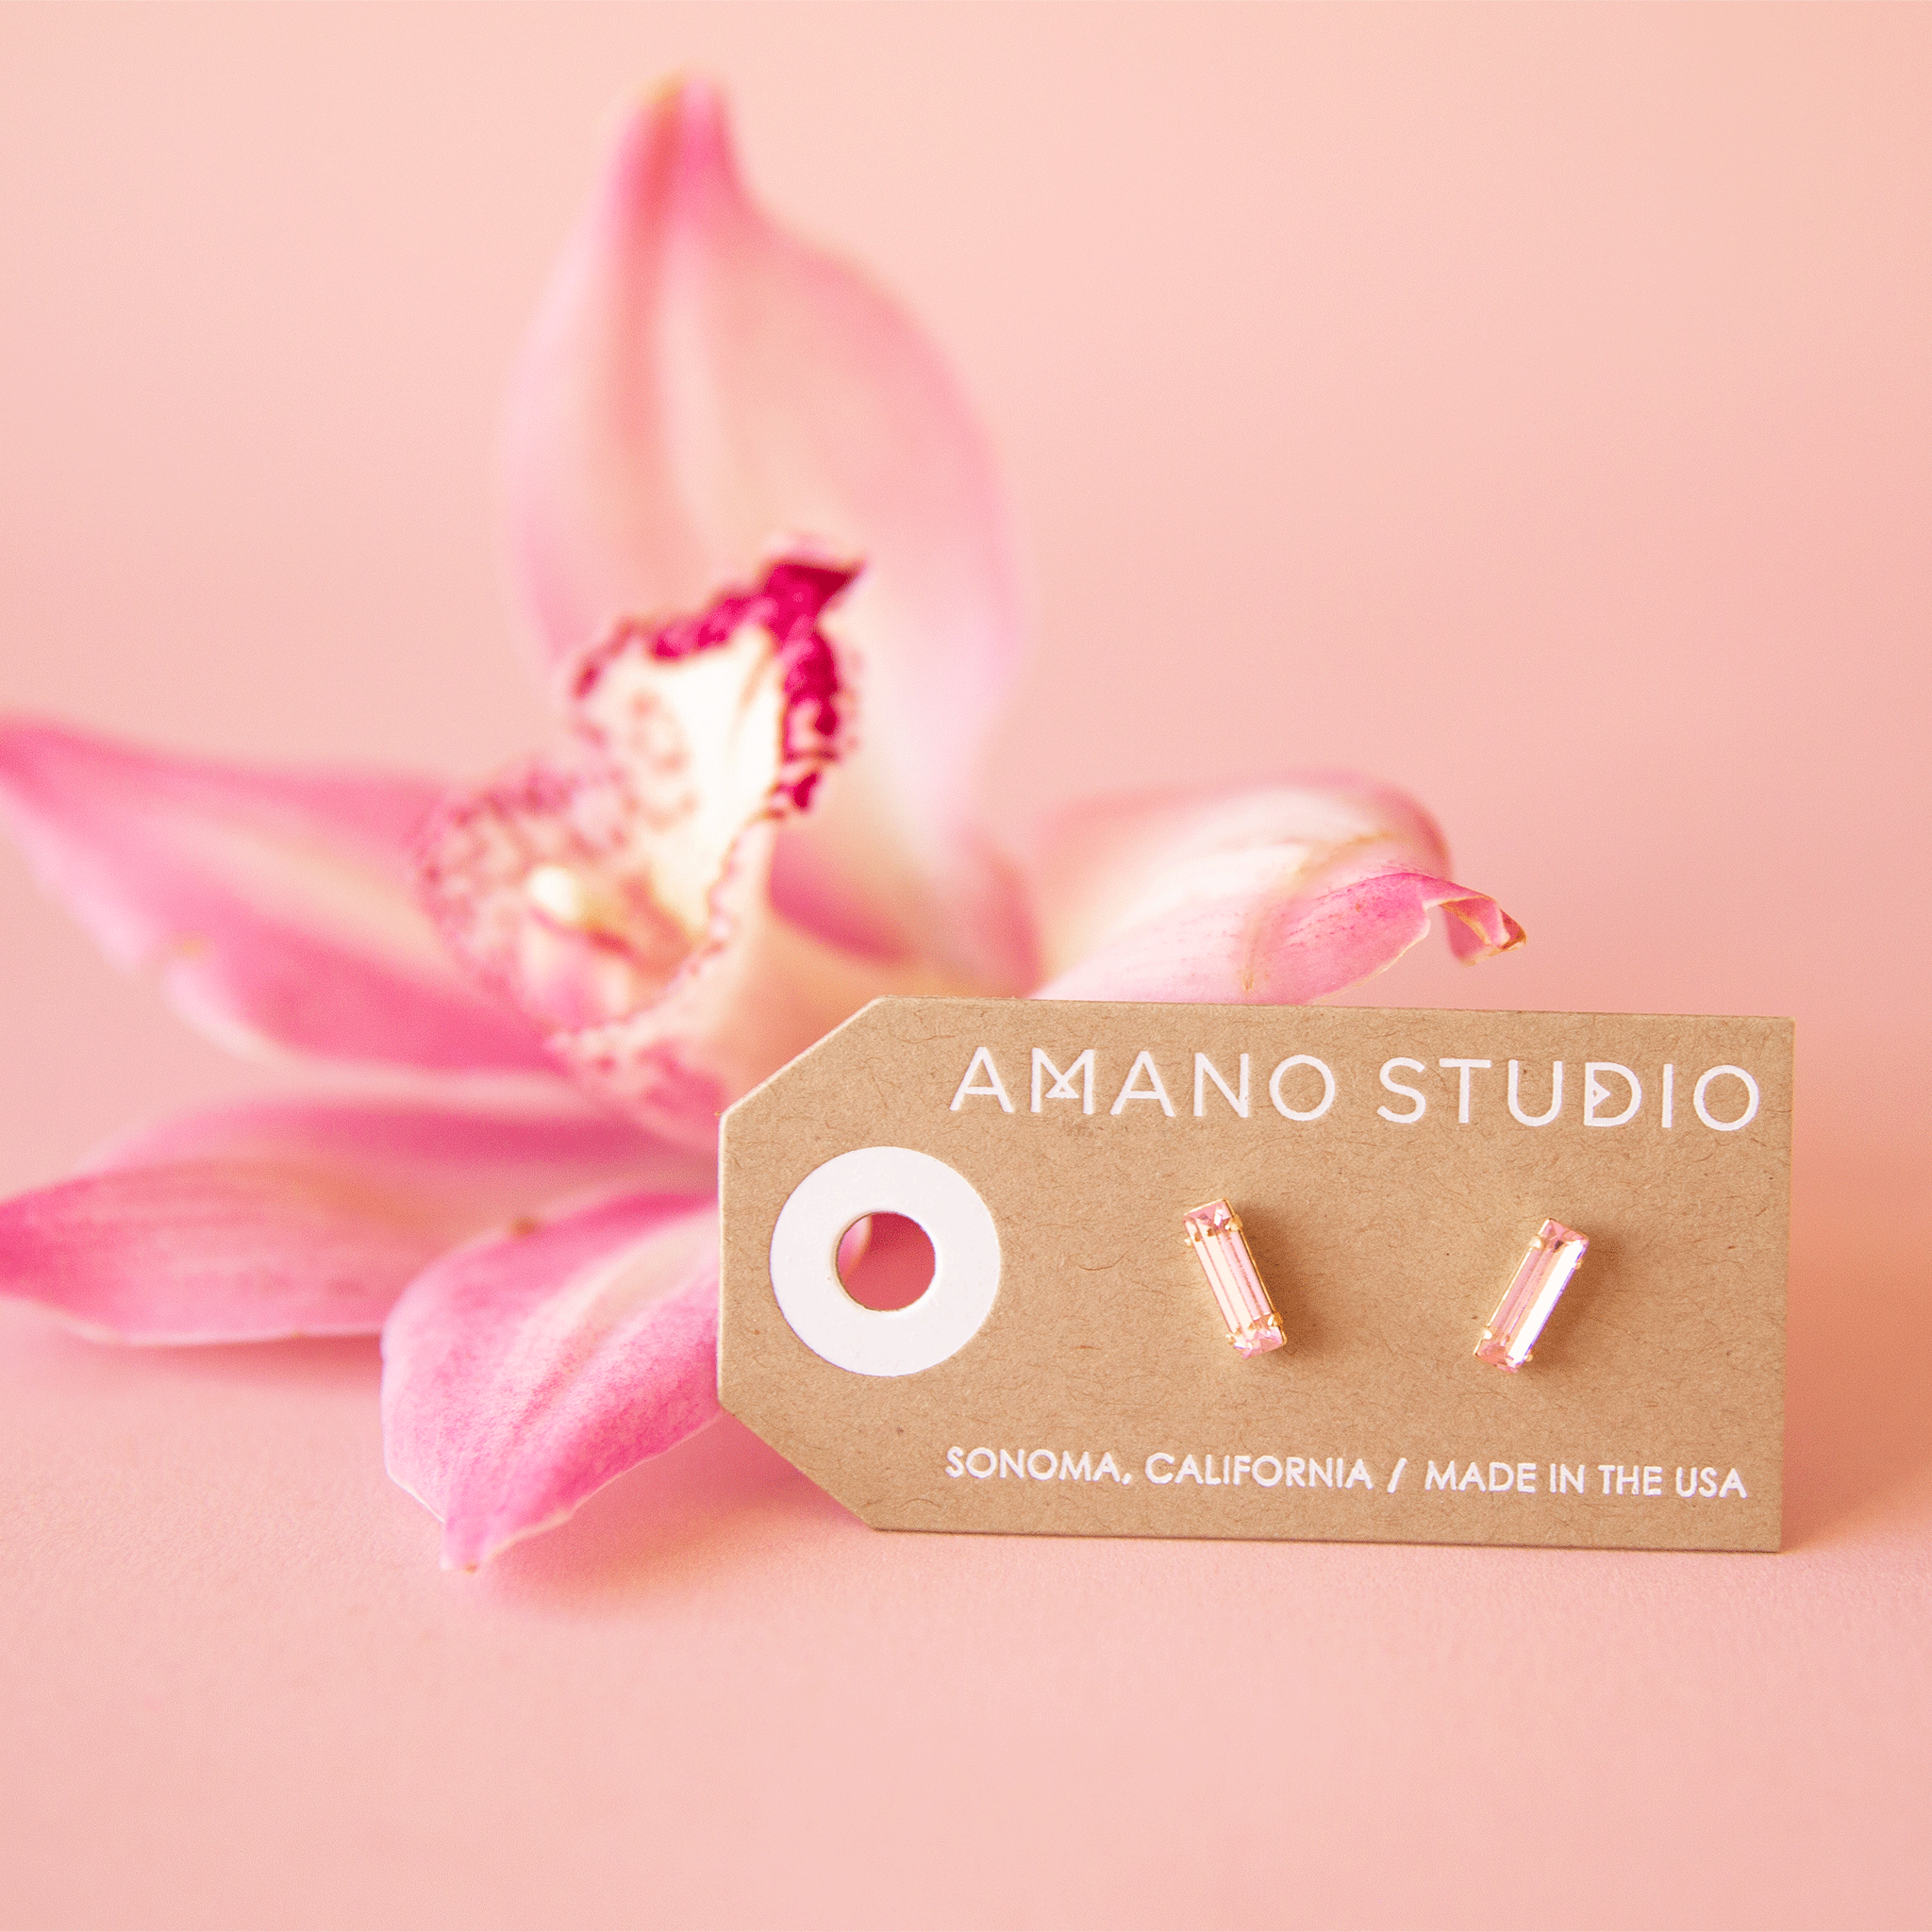 On a pink background is a gold plated of pair of baguette stud earrings with a pink stone in the center.